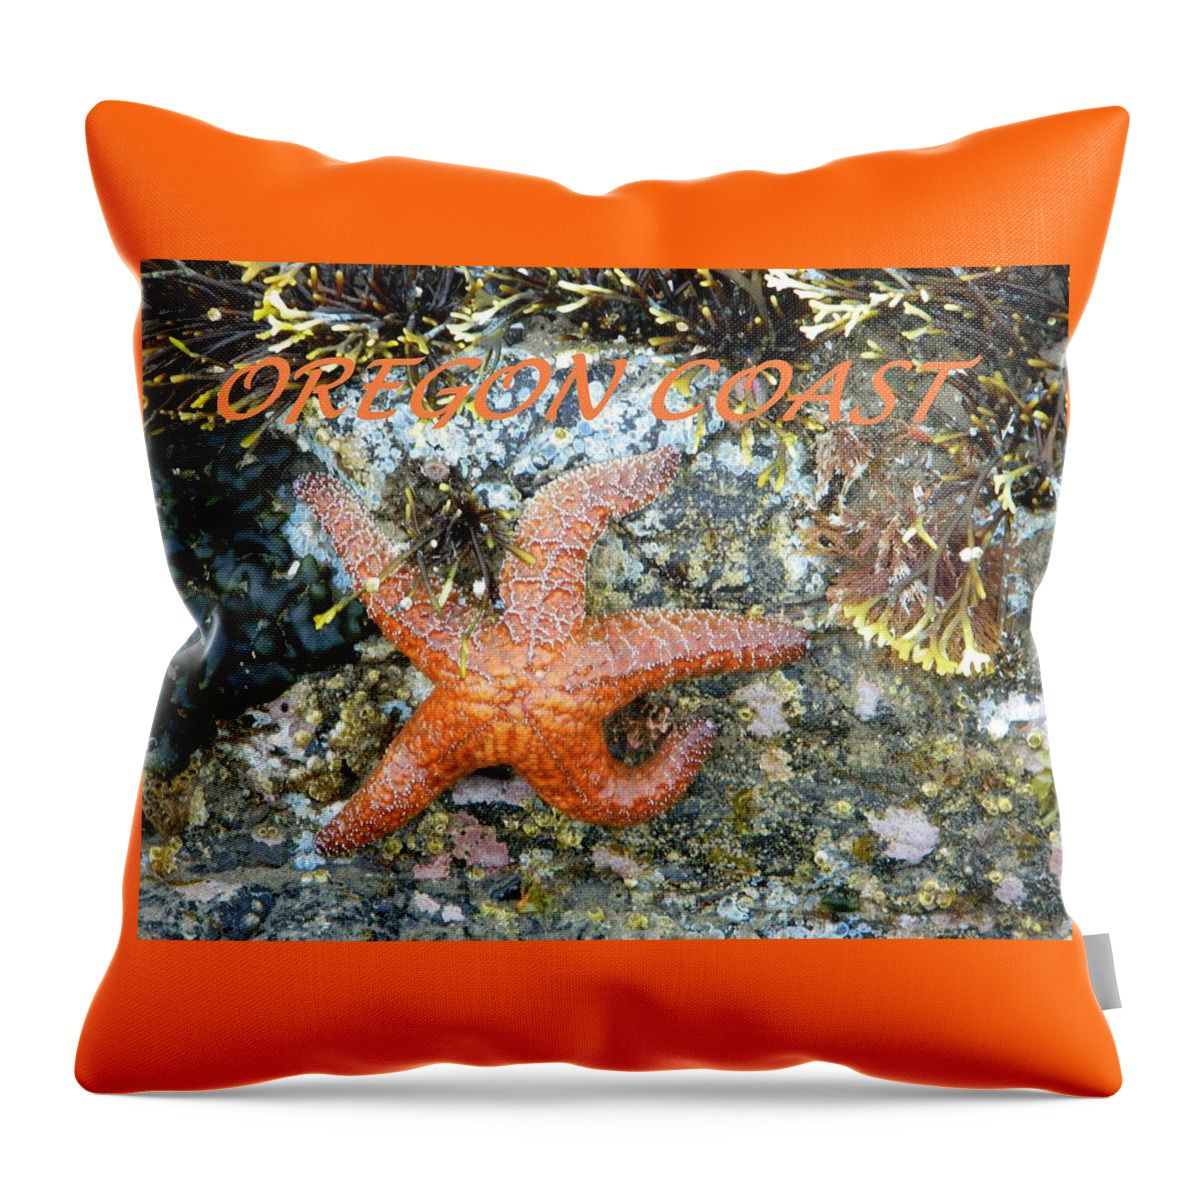 Starfish Throw Pillow featuring the photograph Running Starfish by Gallery Of Hope 